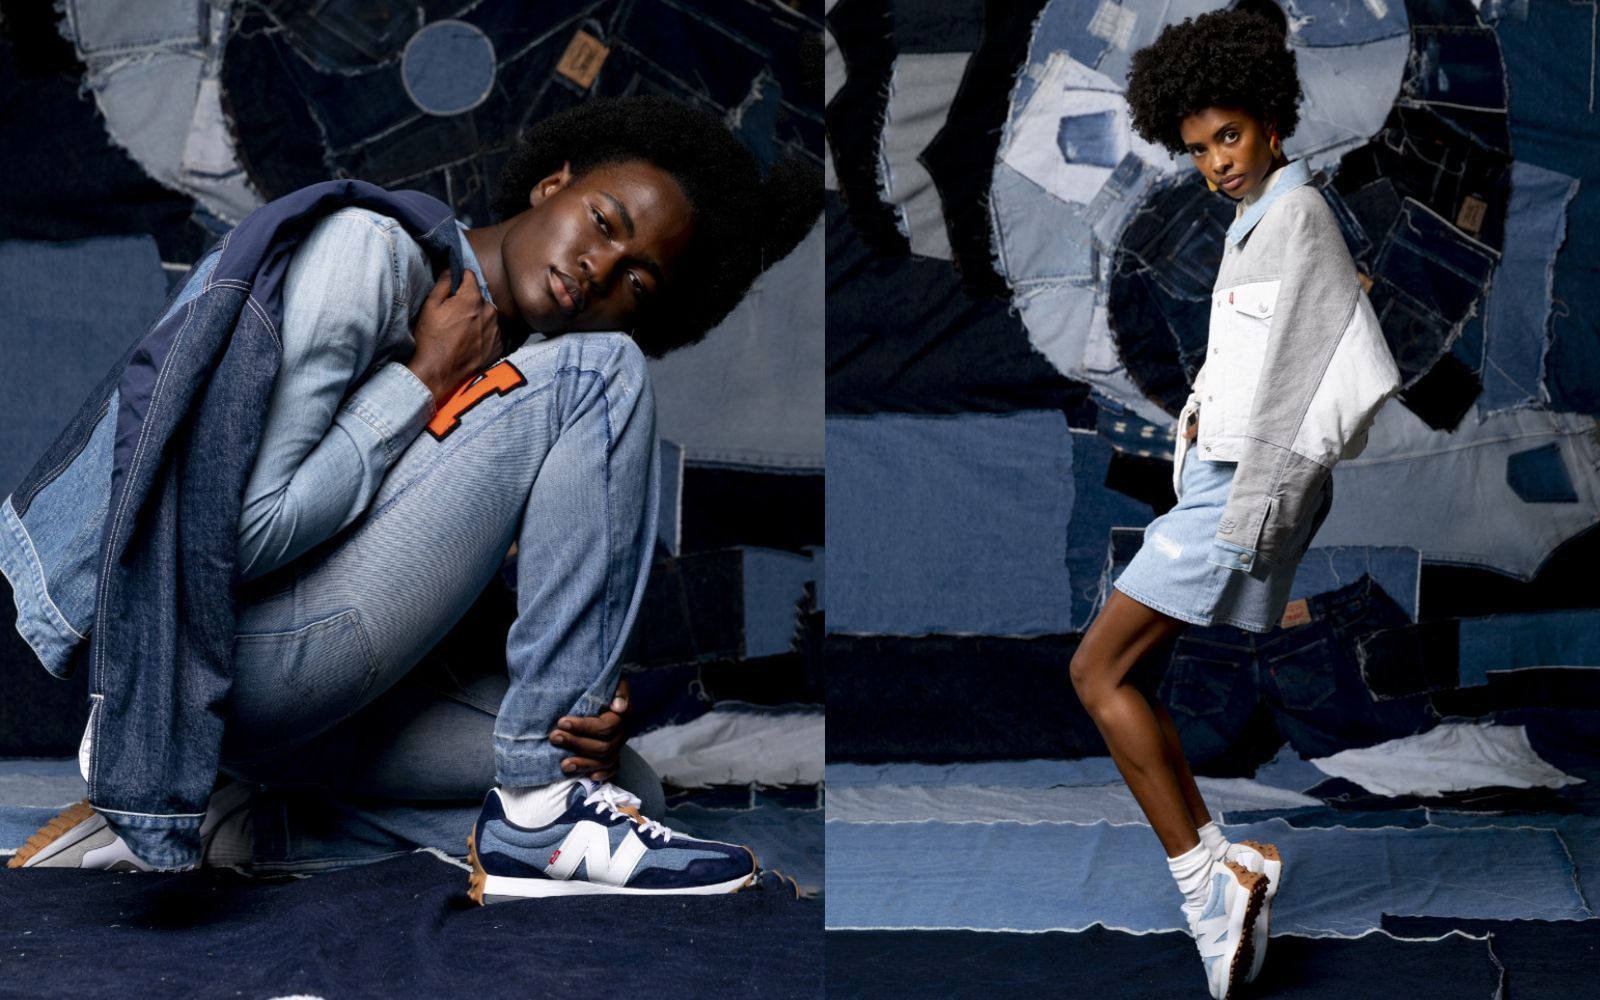 The new Levi's x New Balance collaborative collection